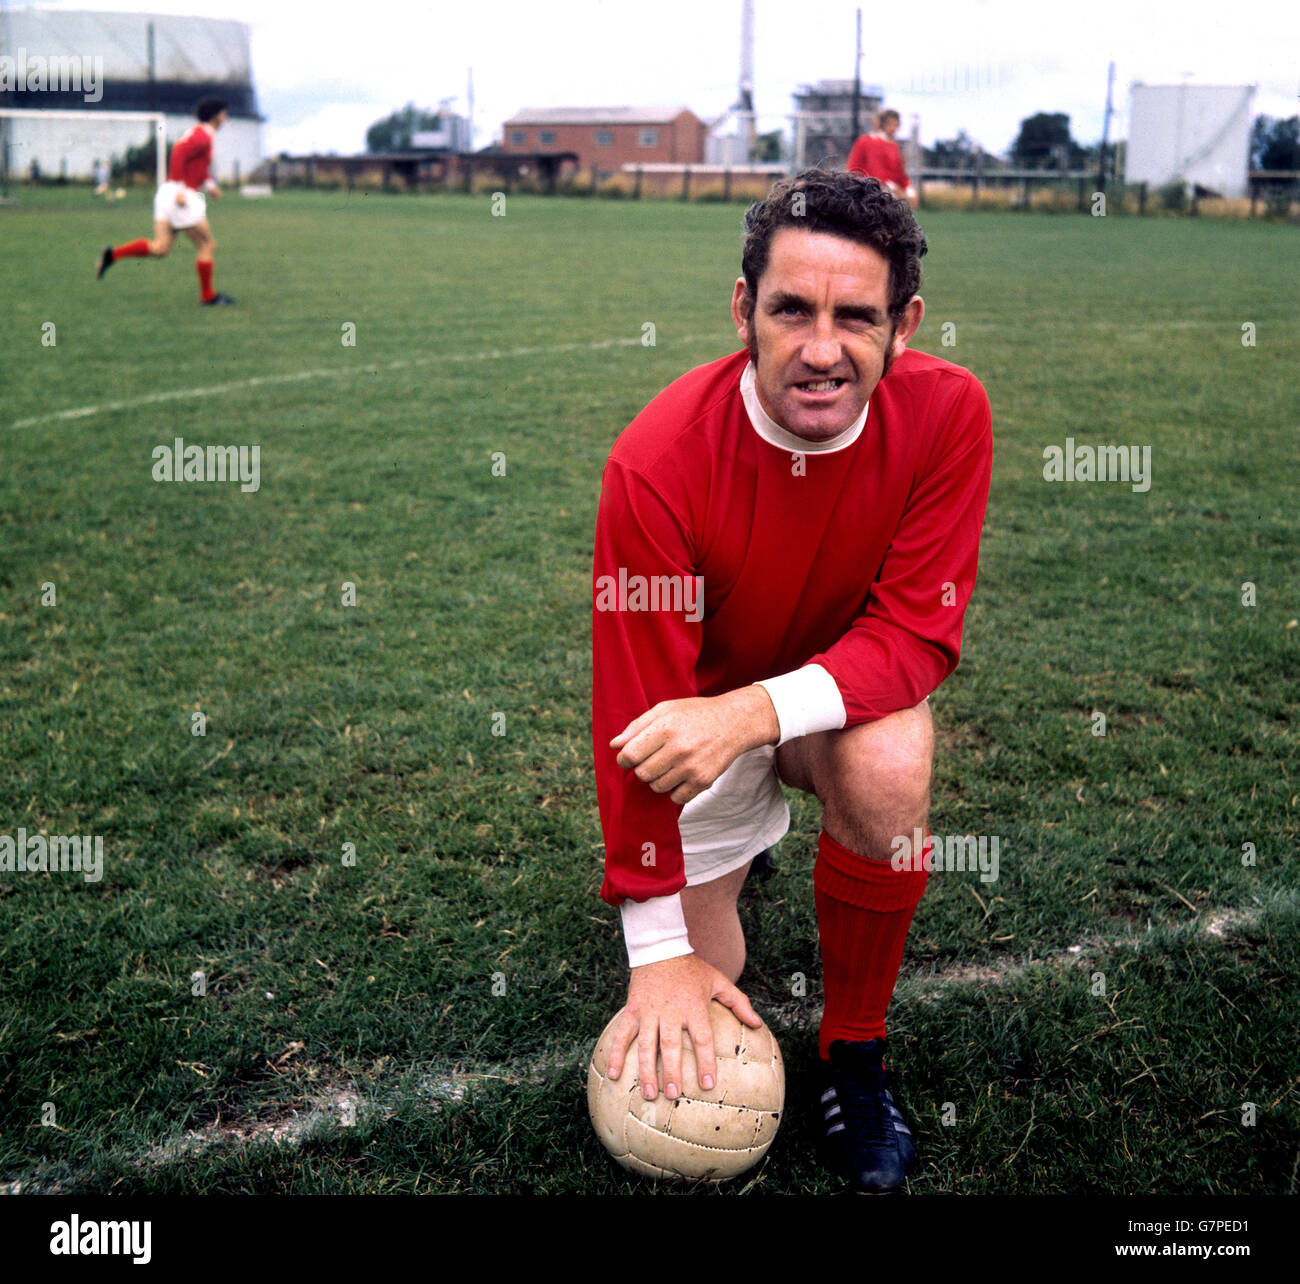 Football - Swindon Town Photocall.Dave Mackay, capitaine de Swindon Town FC. Banque D'Images